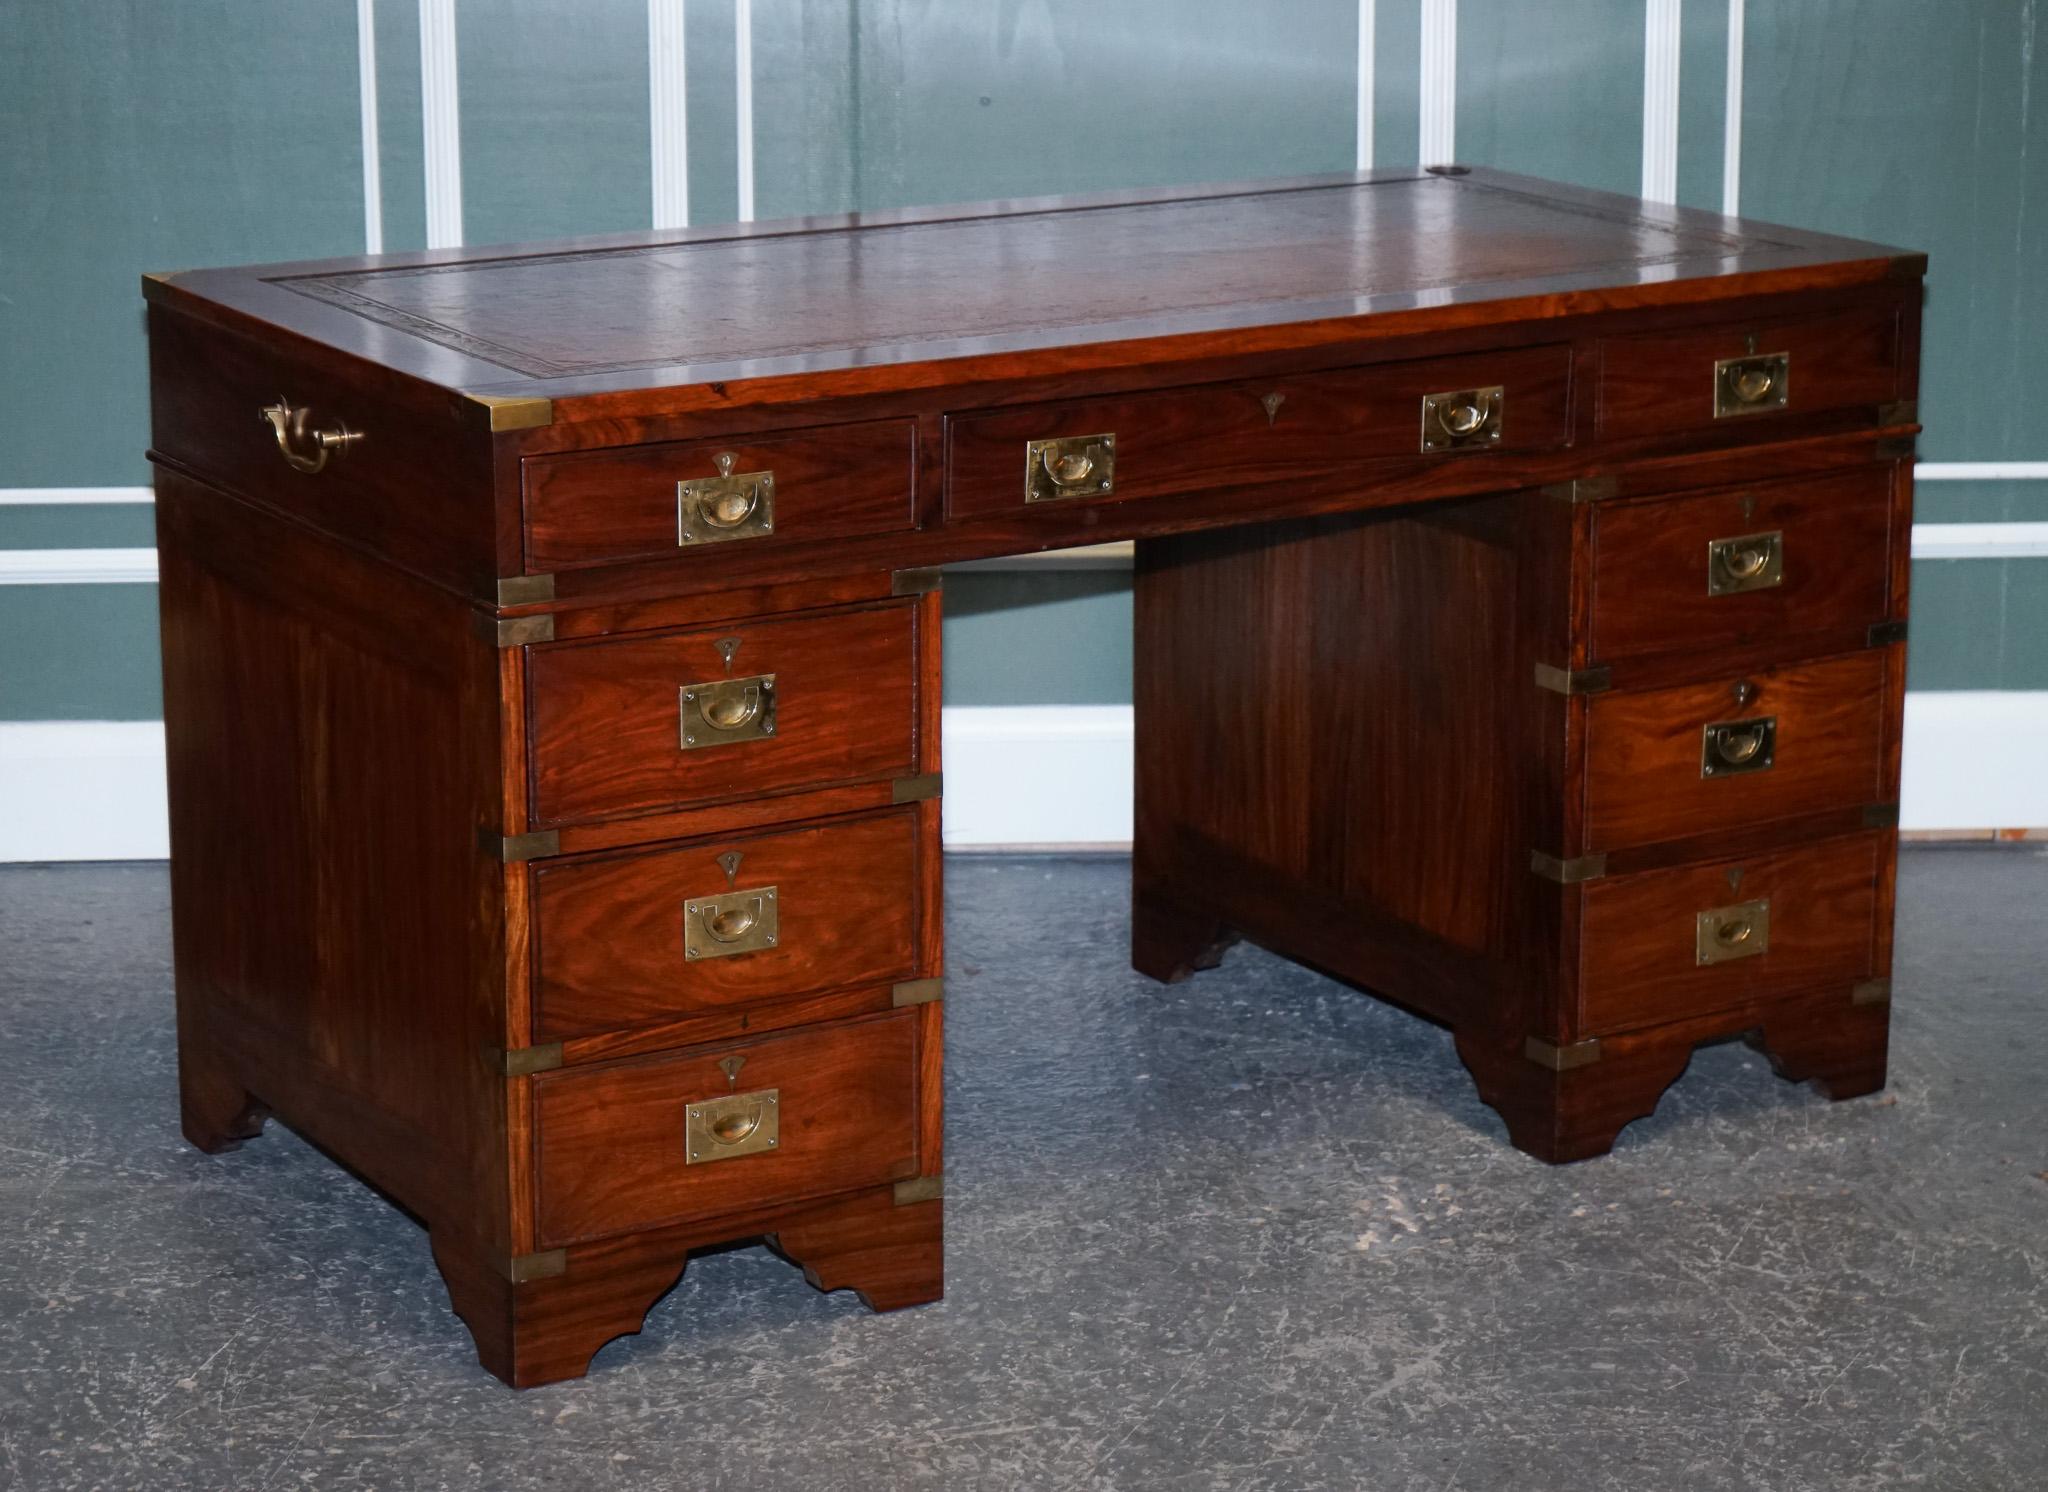 We are delighted to present this stunning Vintage Military Campaign twin pedestal desk.

A beautiful desk, in the traditional campaign style. There are nine drawers to give you plenty of storage.
All drawers have a lock. There are brass handles on